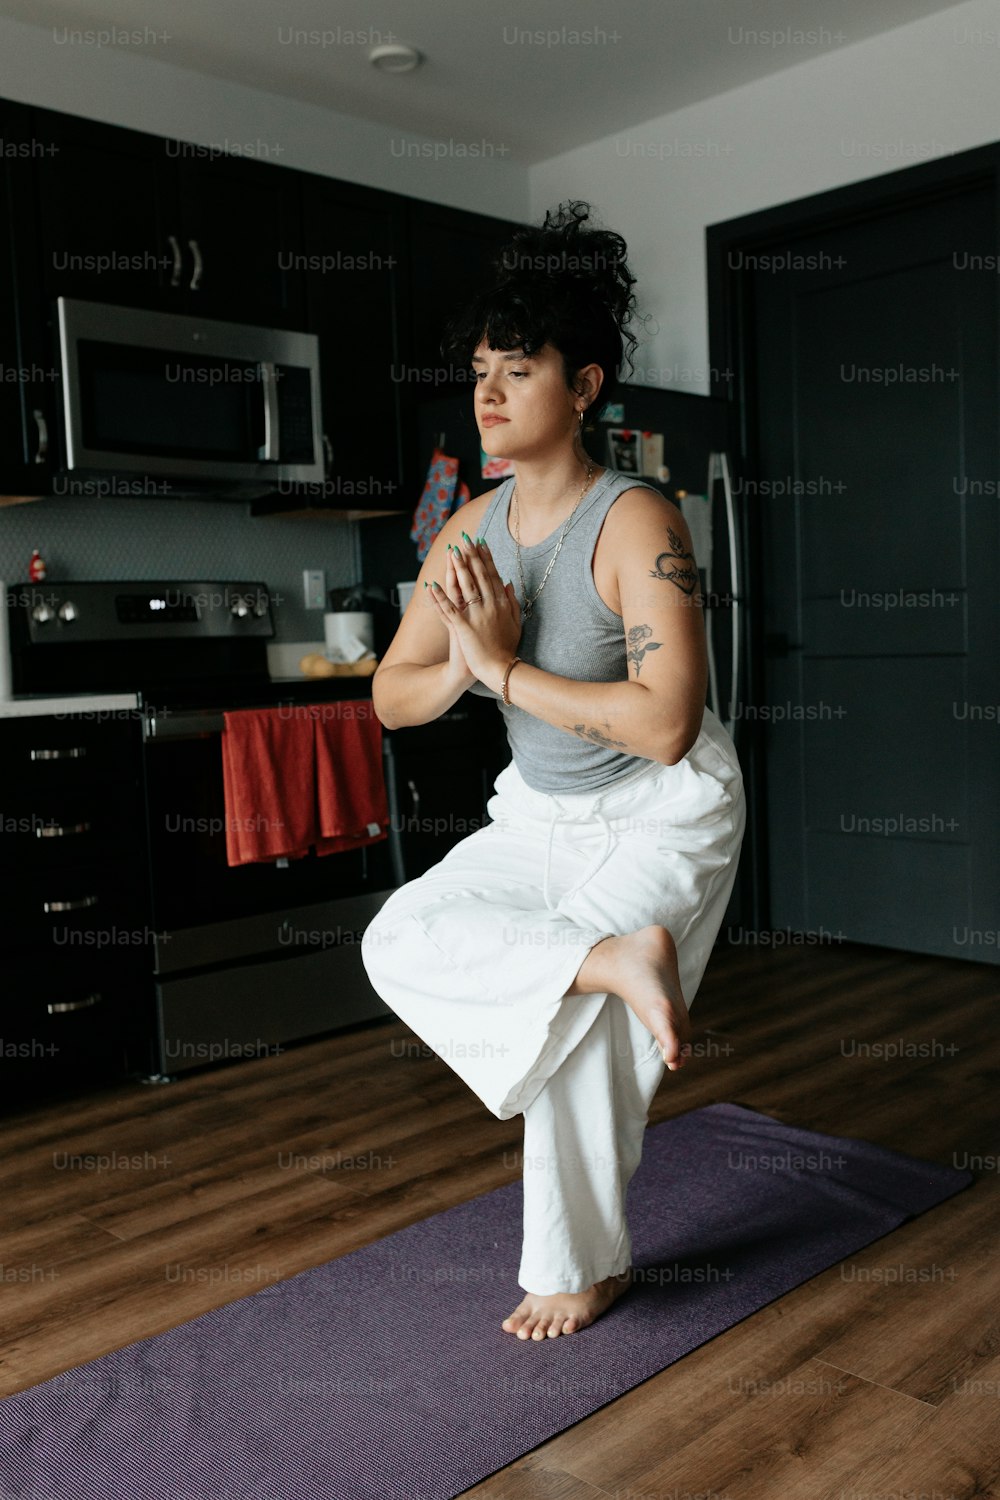 a man is doing yoga in a kitchen